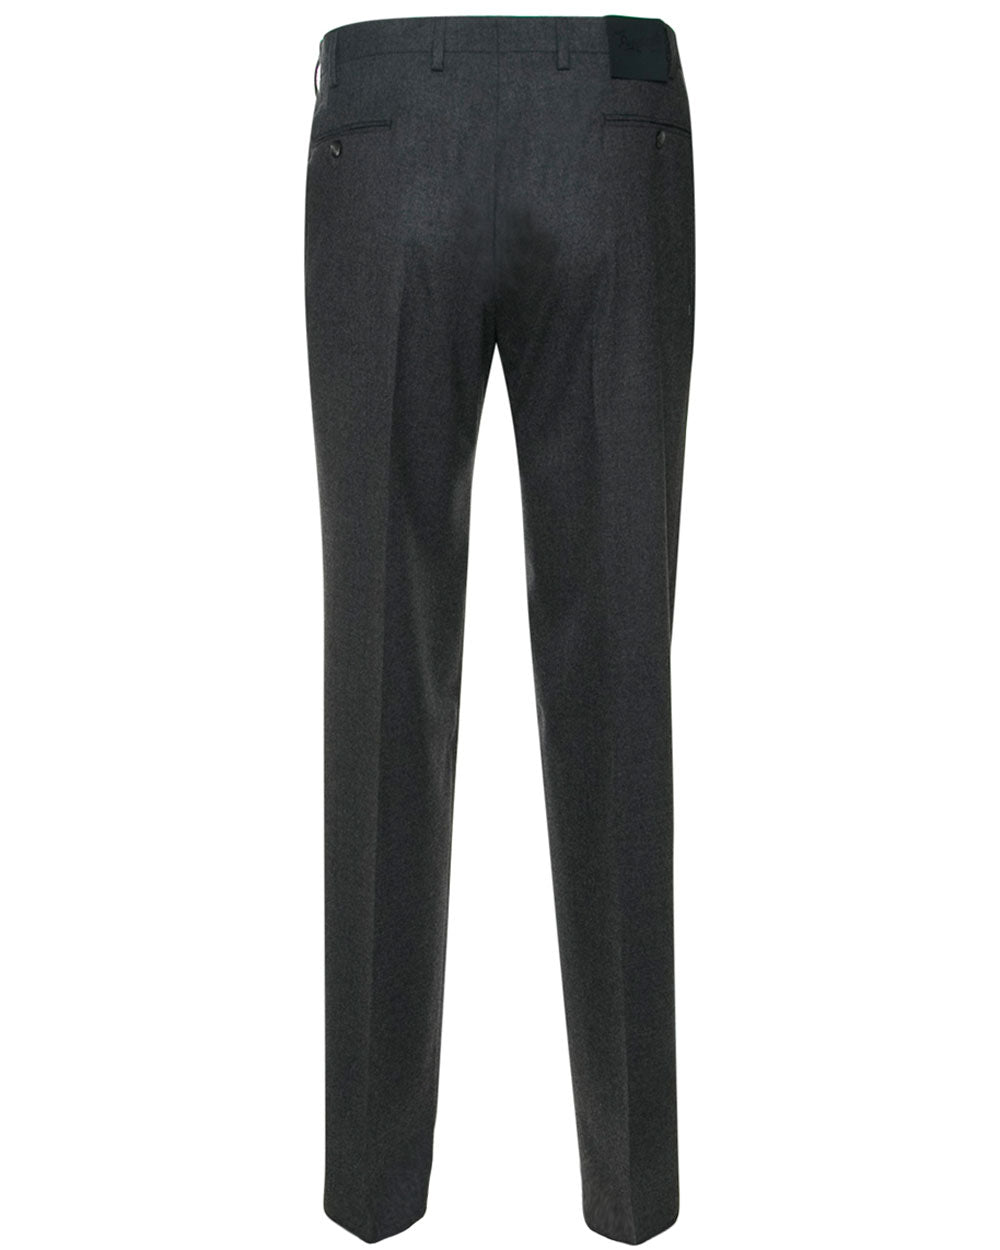 Cashmere Dress Pant in Dark Gray